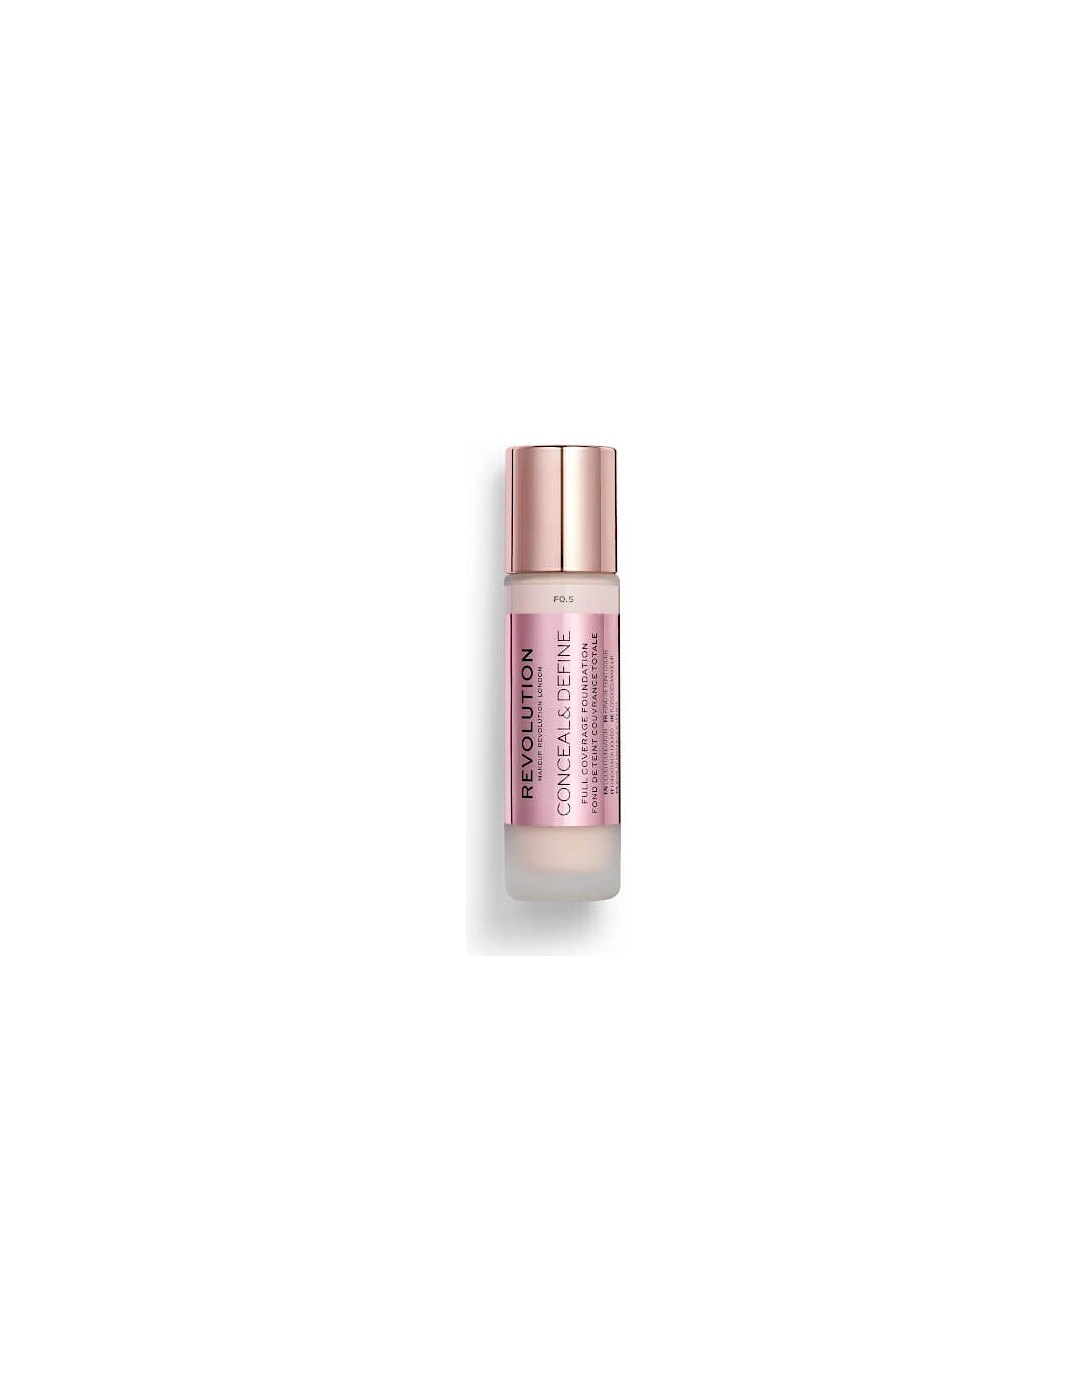 Conceal & Define Foundation - F0.5, 2 of 1